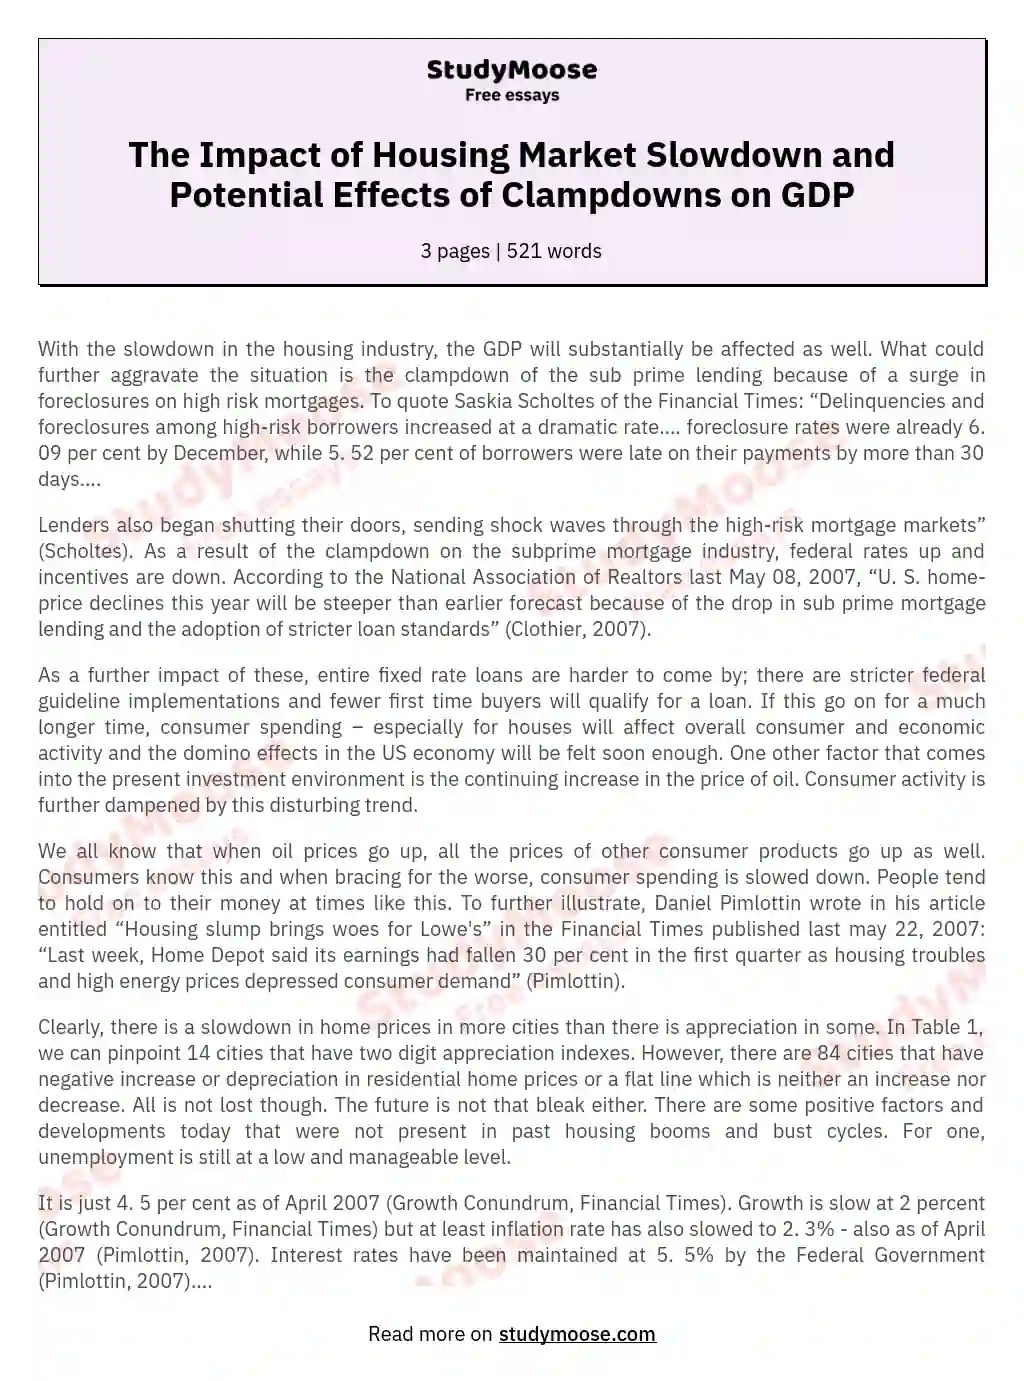 The Impact of Housing Market Slowdown and Potential Effects of Clampdowns on GDP essay